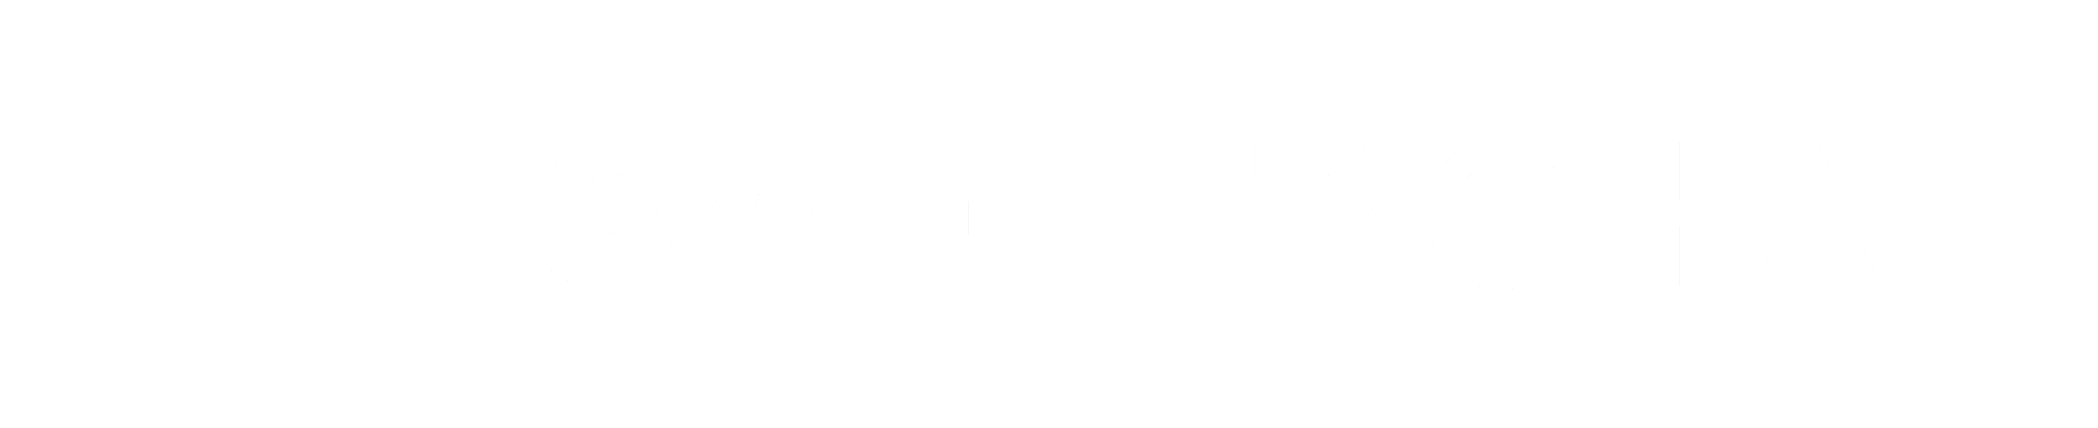 SafetyChain ( final file ) (png).png